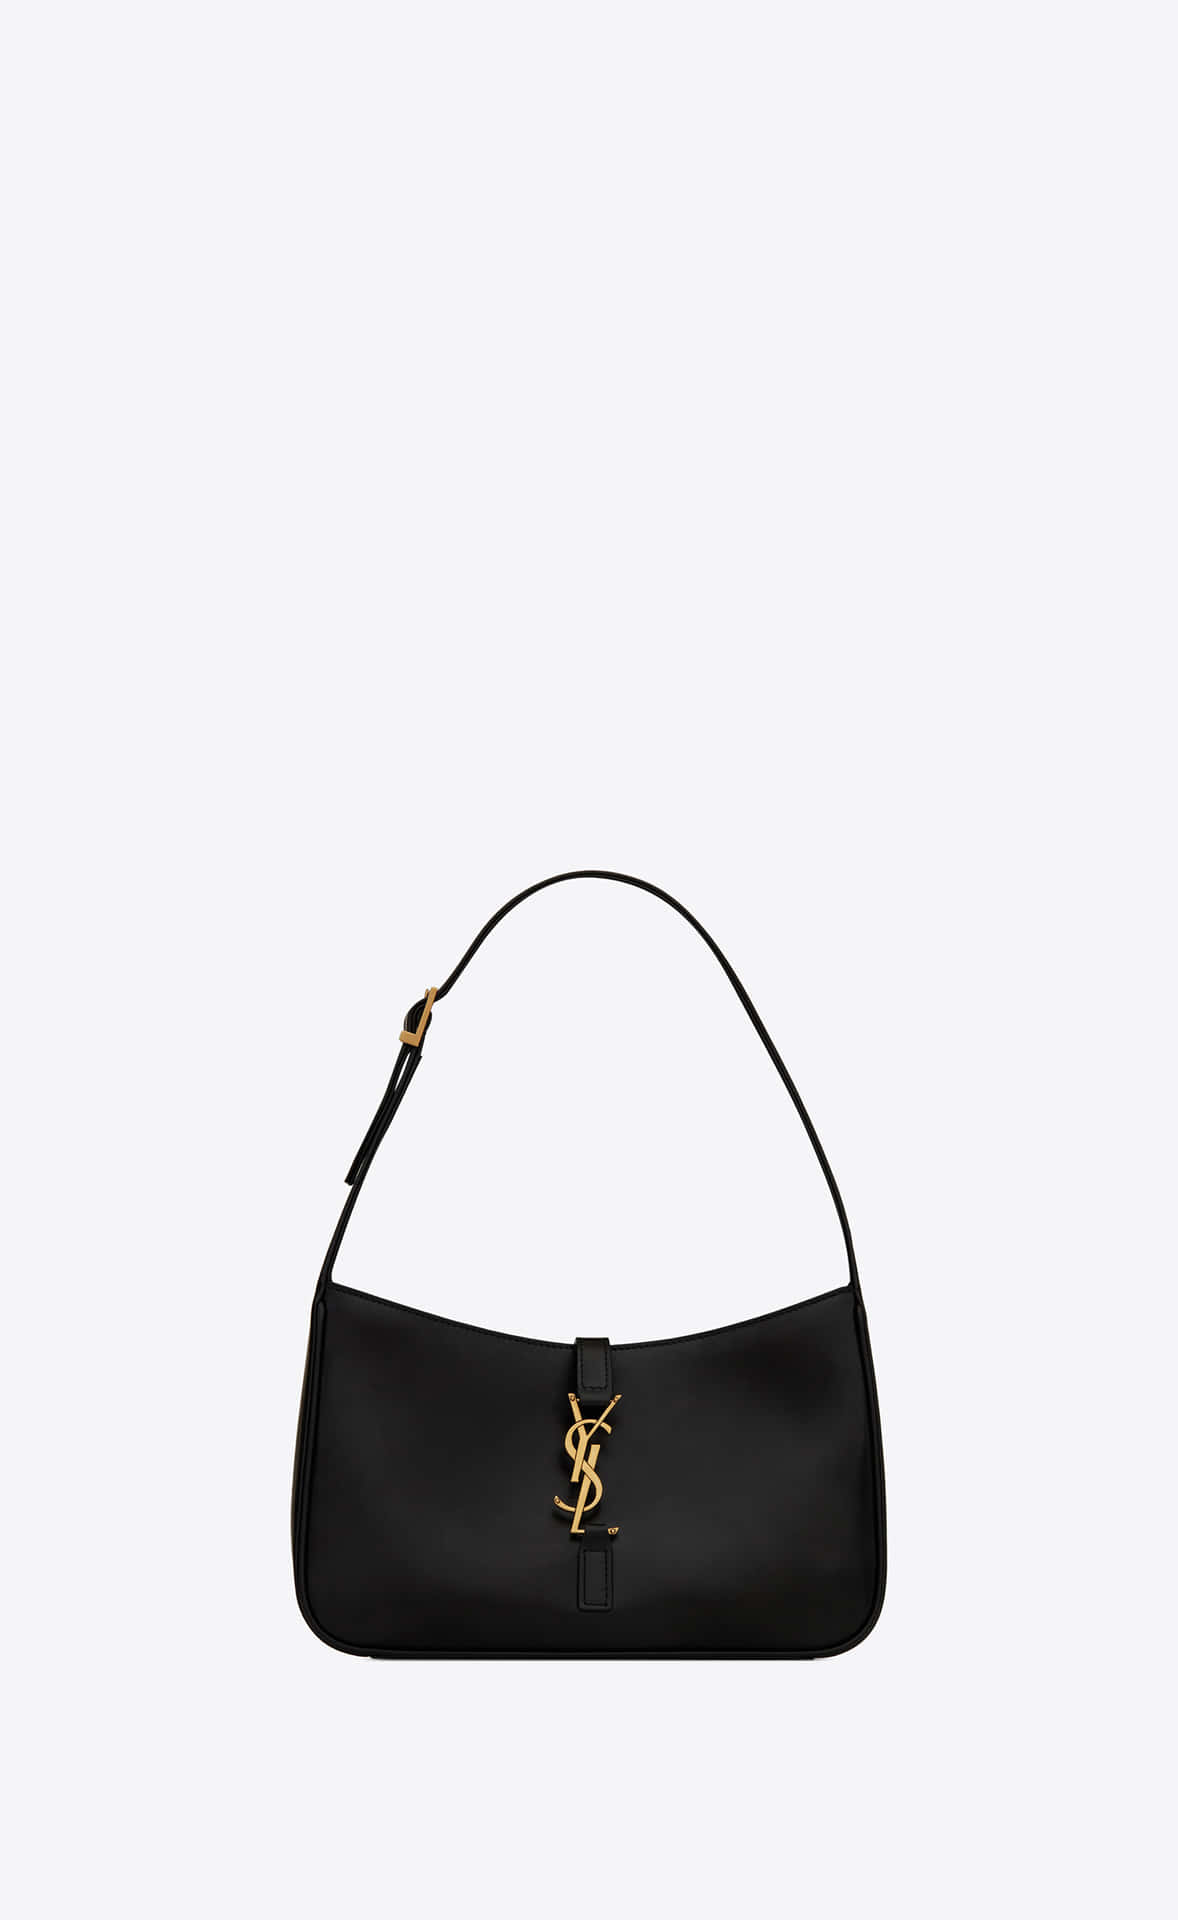 Let YSL enchant you with its top quality luxury products.